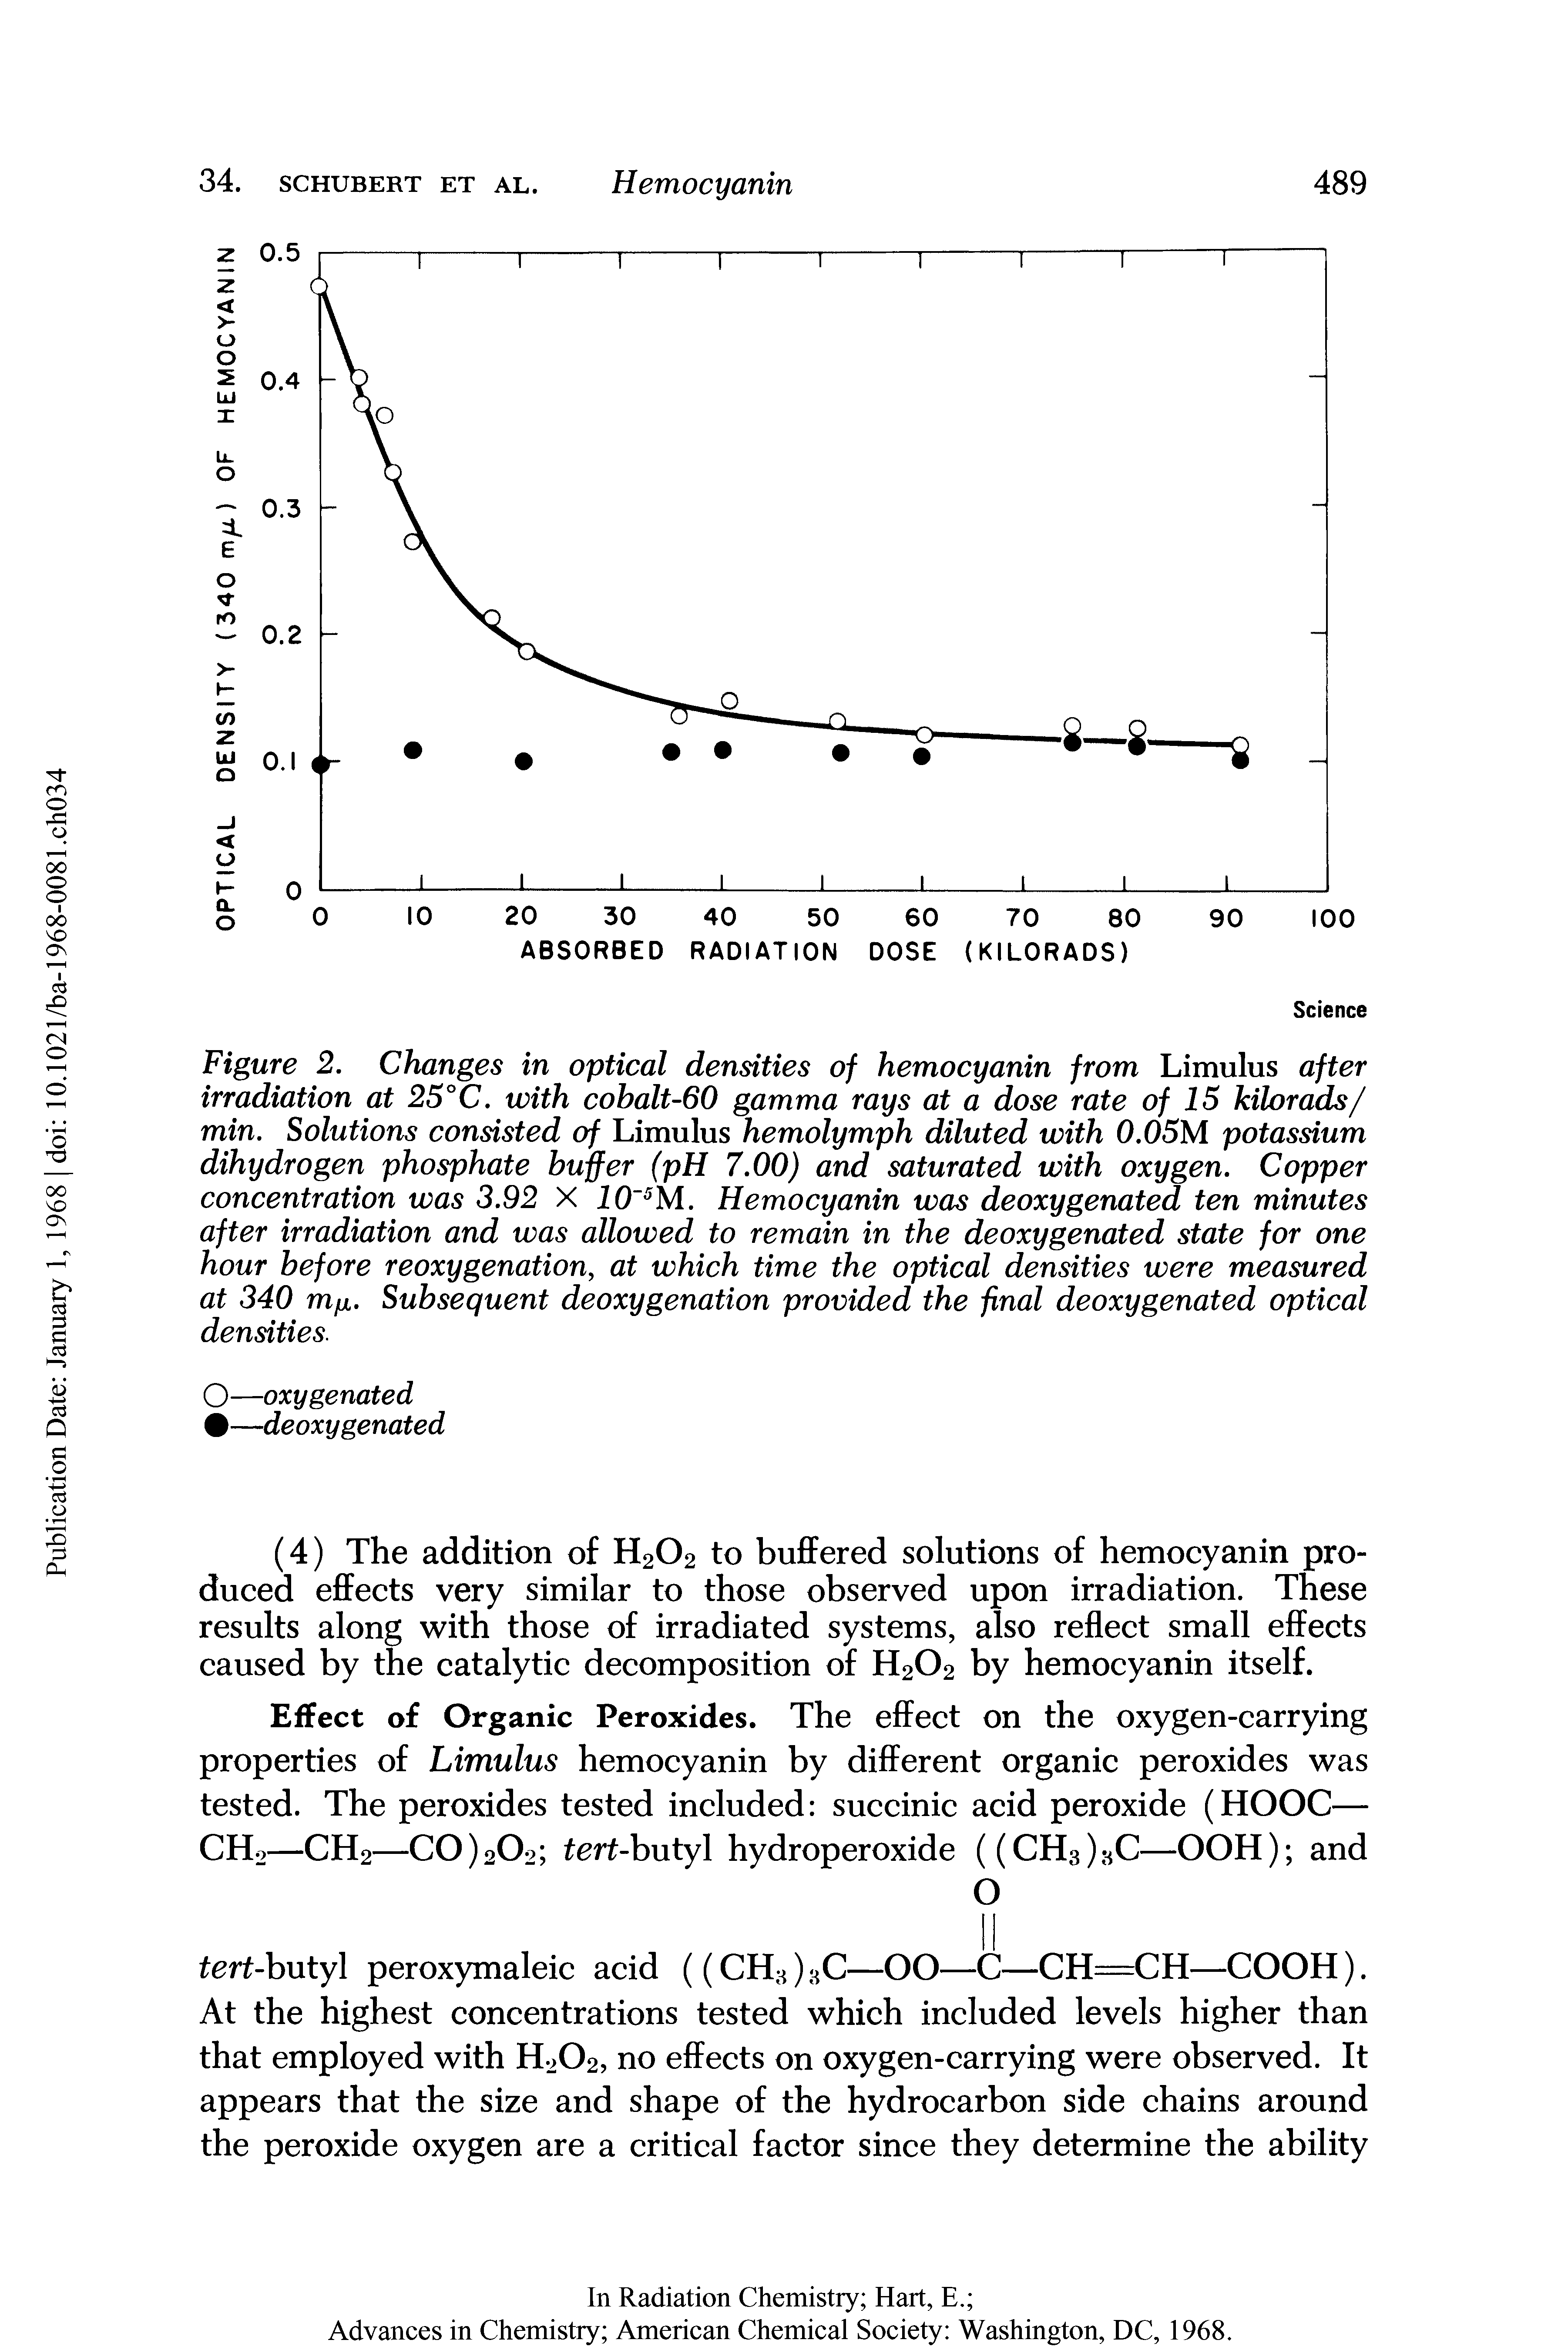 Figure 2. Changes in optical densities of hemocyanin from Limulus after irradiation at 25°C. with cobalt-60 gamma rays at a dose rate of 15 kilorads/ min. Solutions consisted of Limulus hemolymph diluted with 0.05M potassium dihydrogen phosphate buffer (pH 7.00) and saturated with oxygen. Copper concentration was 3.92 X 10 5M. Hemocyanin was deoxygenated ten minutes after irradiation and was allowed to remain in the deoxygenated state for one hour before reoxygenation, at which time the optical densities were measured at 340 mfi. Subsequent deoxygenation provided the final deoxygenated optical densities.